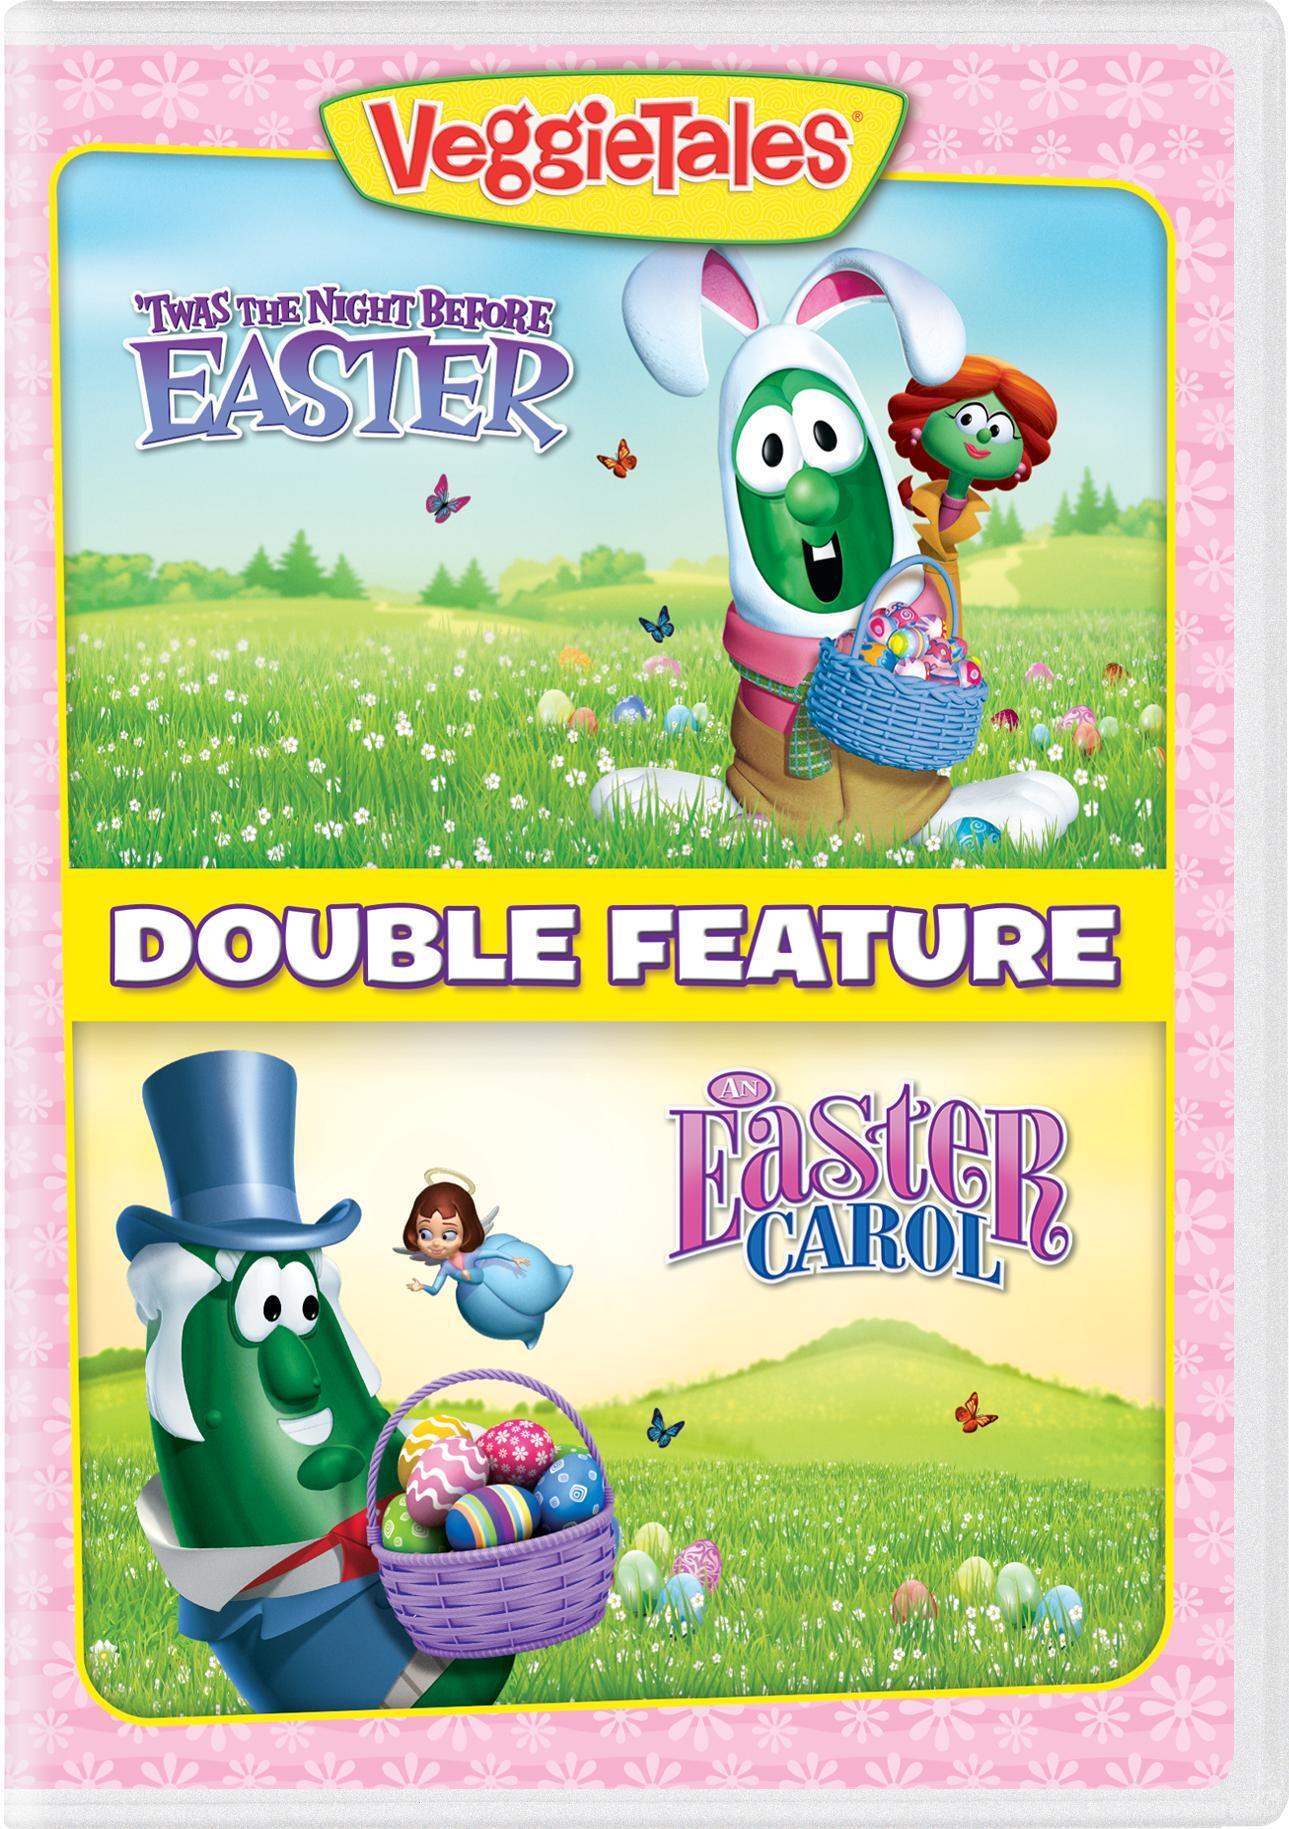 VeggieTales Easter: 'Twas The Night Before Easter/An Easter Carol (DVD Double Feature) - DVD   - Children Movies On DVD - Movies On GRUV